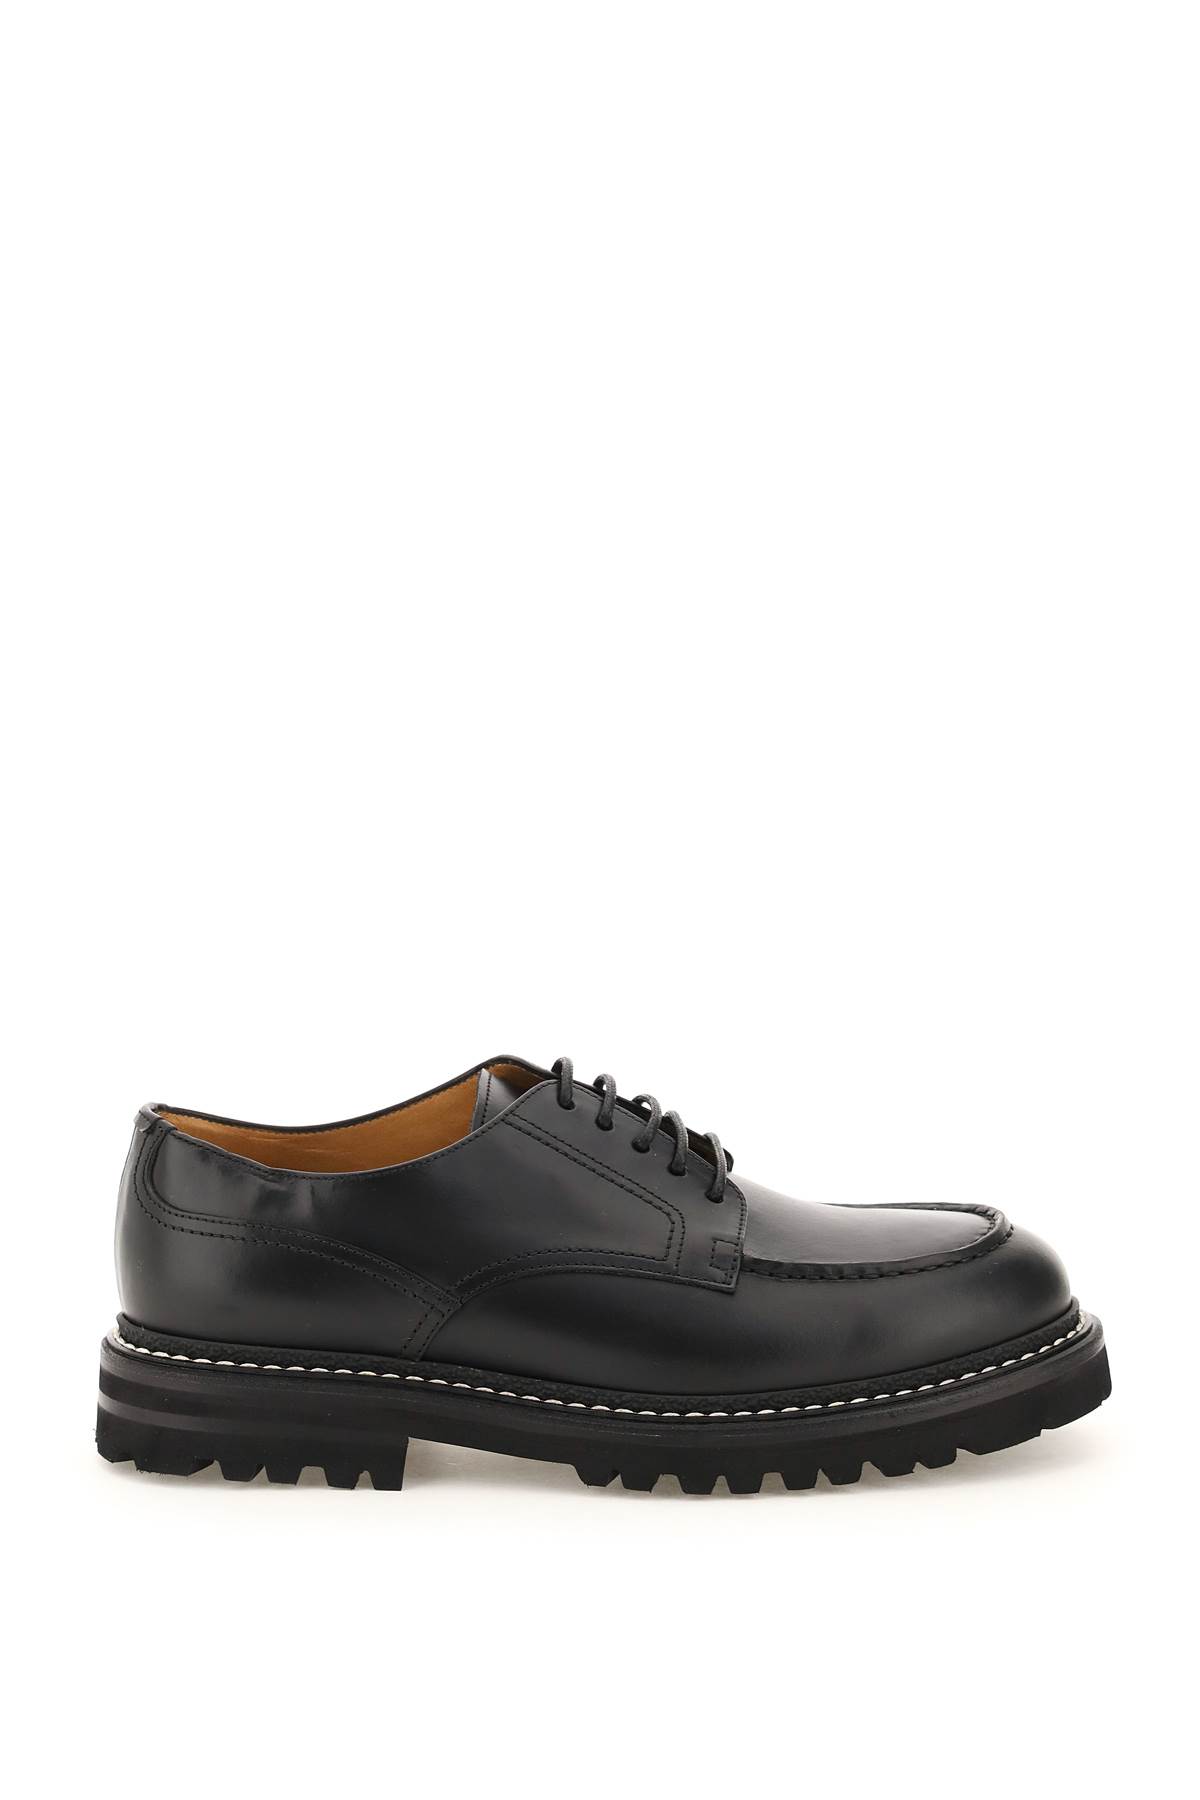 Henderson Baracco Leather Lace-up Shoes